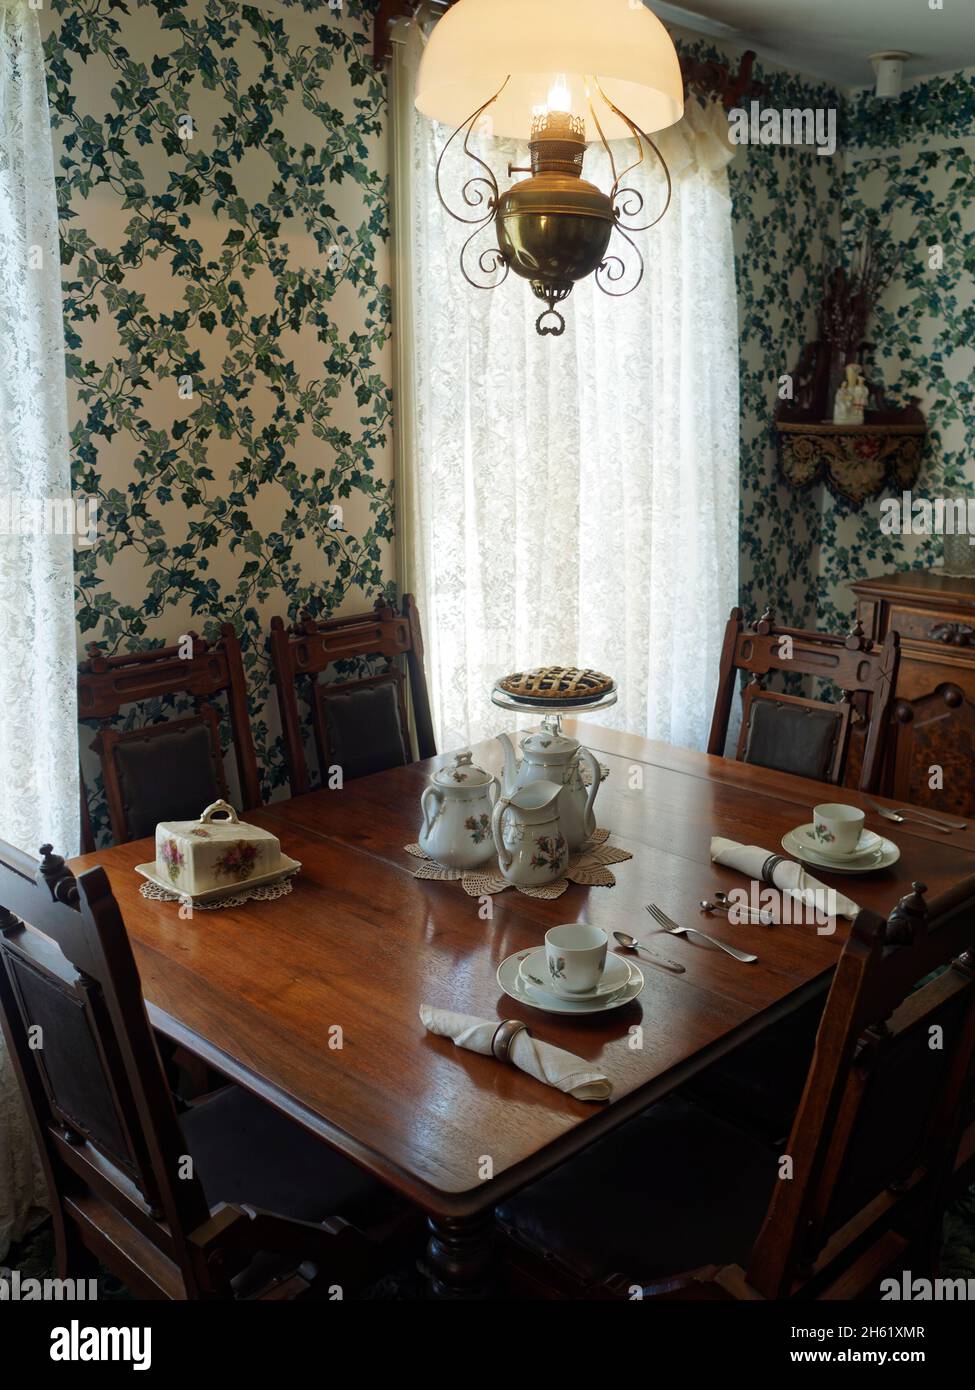 anne of green gables',anne of green gables heritage place,author lucy maude montgomery,canada,dining table,fictional story,interior,prince edward island Stock Photo